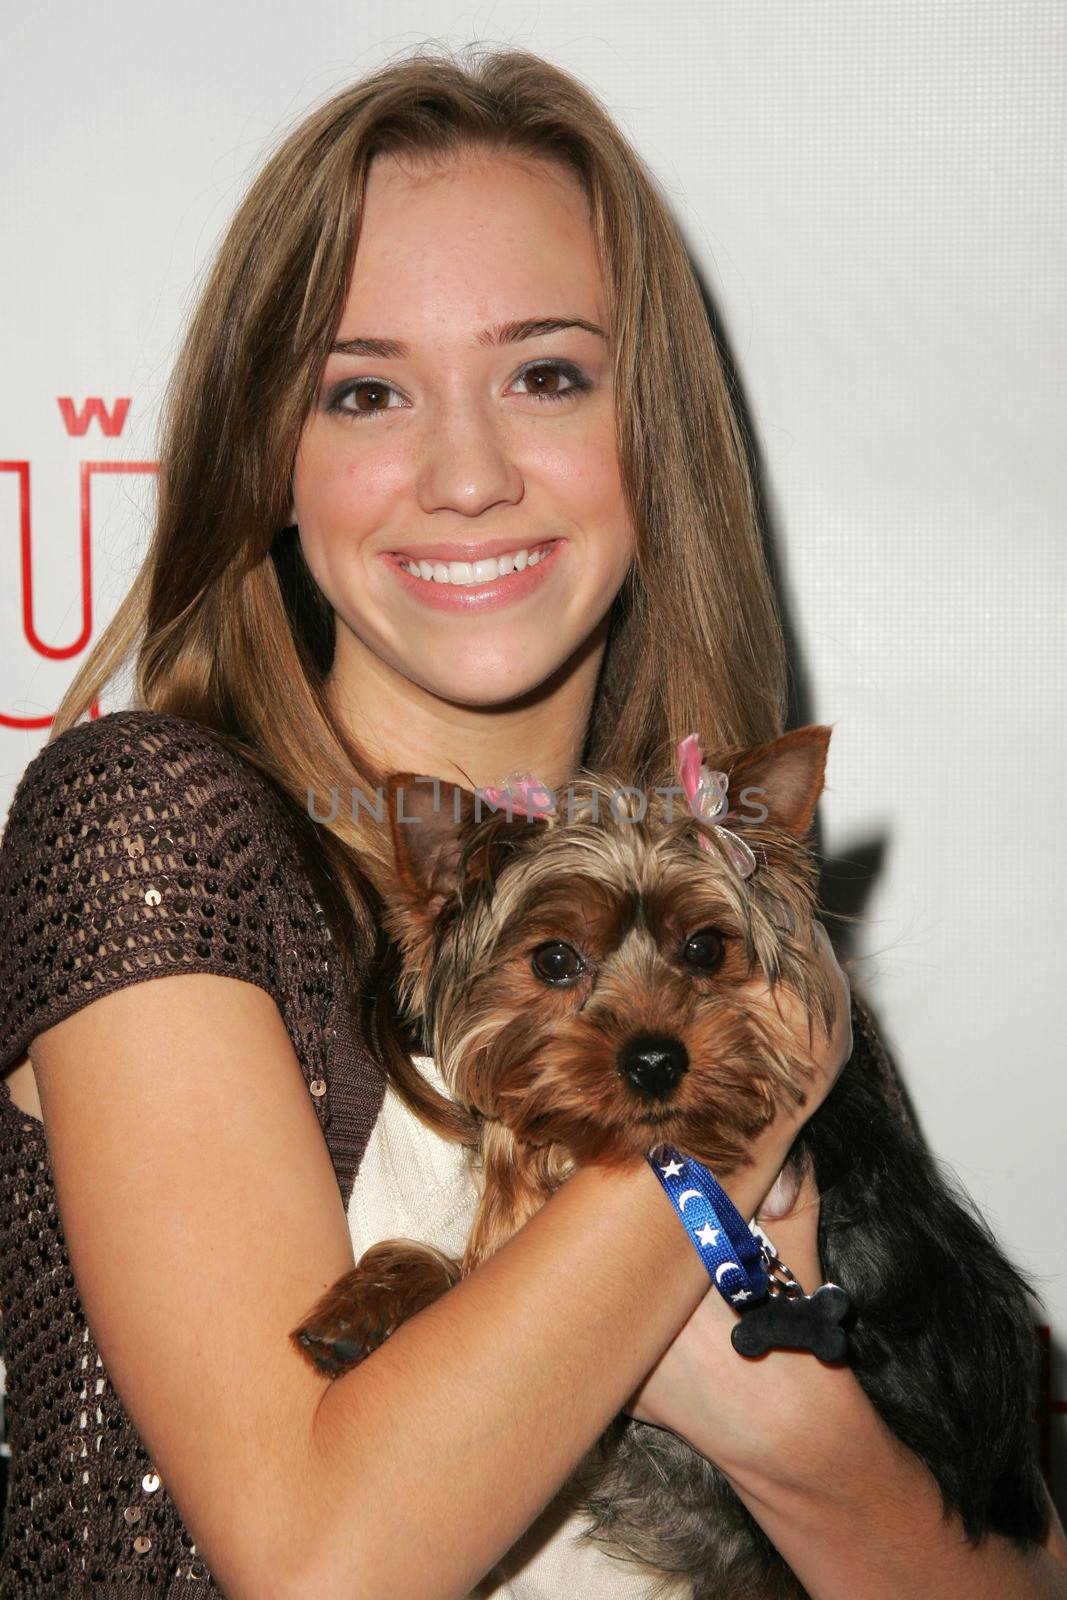 Andrea Bowen at the In Touch Presents Pets And Their Stars Party, Cabana Club, Hollywood, CA 09-21-05